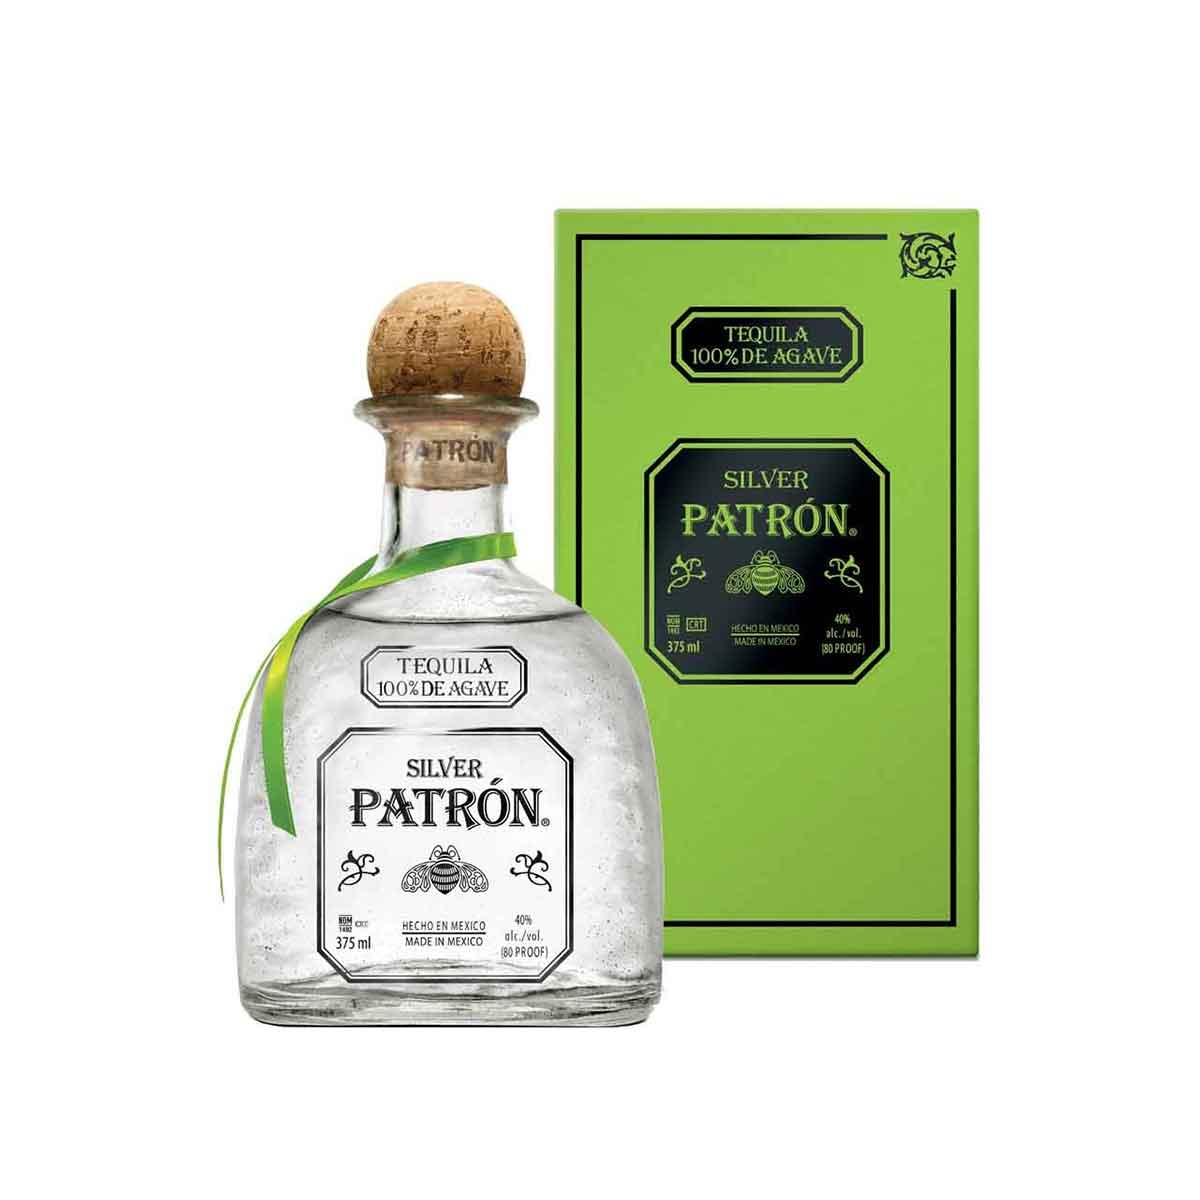 Tag Liquor Stores Delivery BC - Patron Silver Tequila 375ml ...